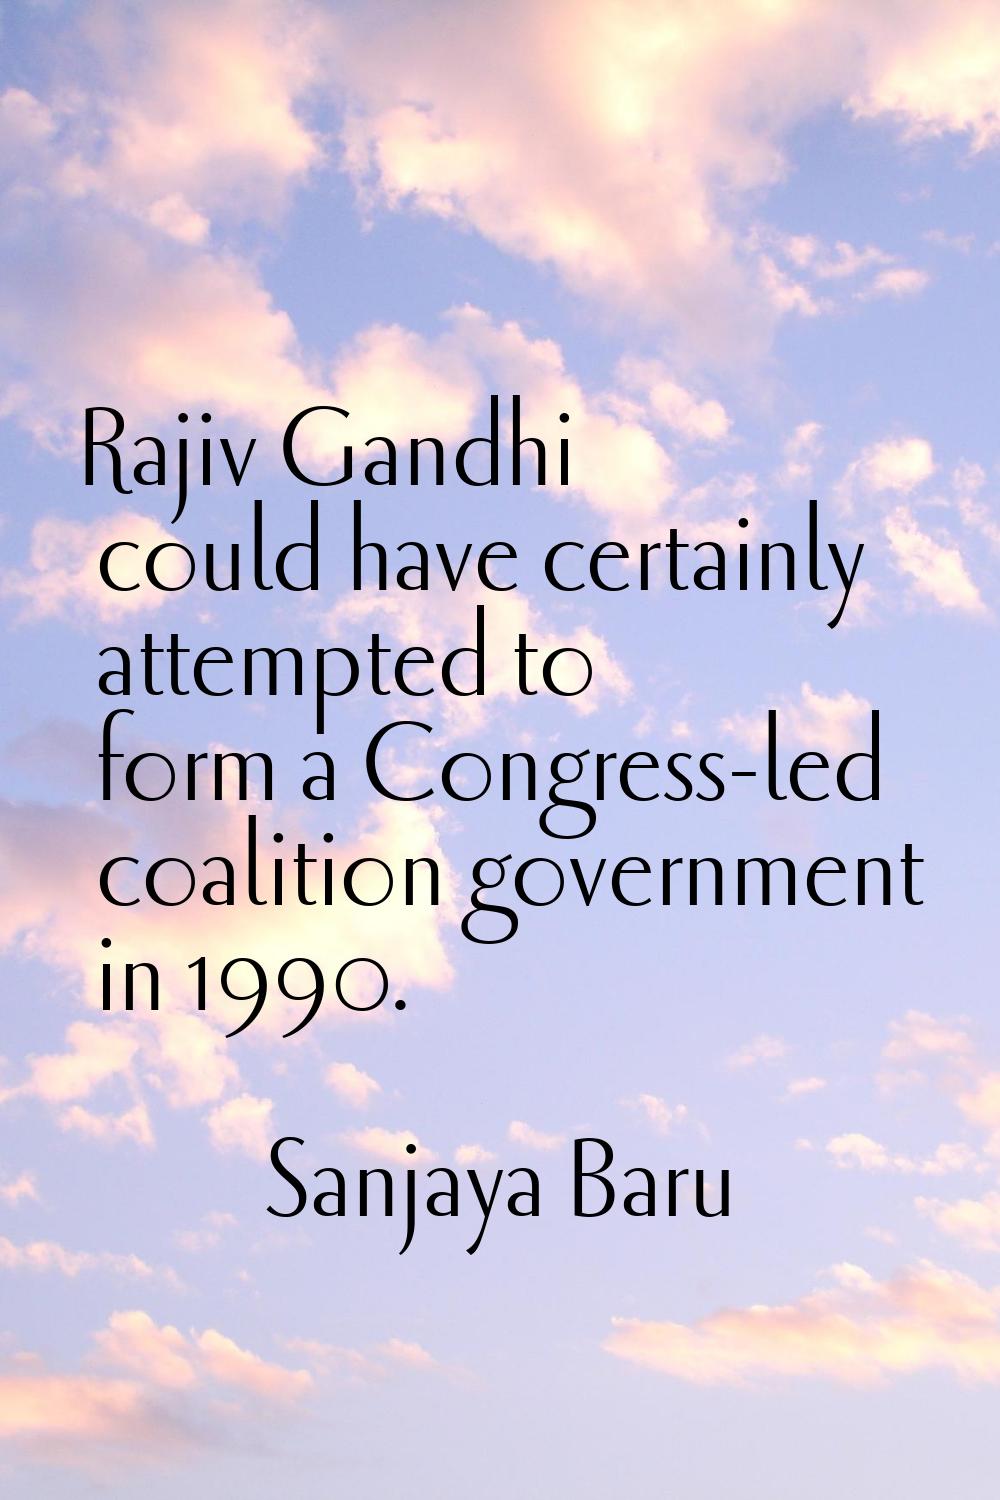 Rajiv Gandhi could have certainly attempted to form a Congress-led coalition government in 1990.